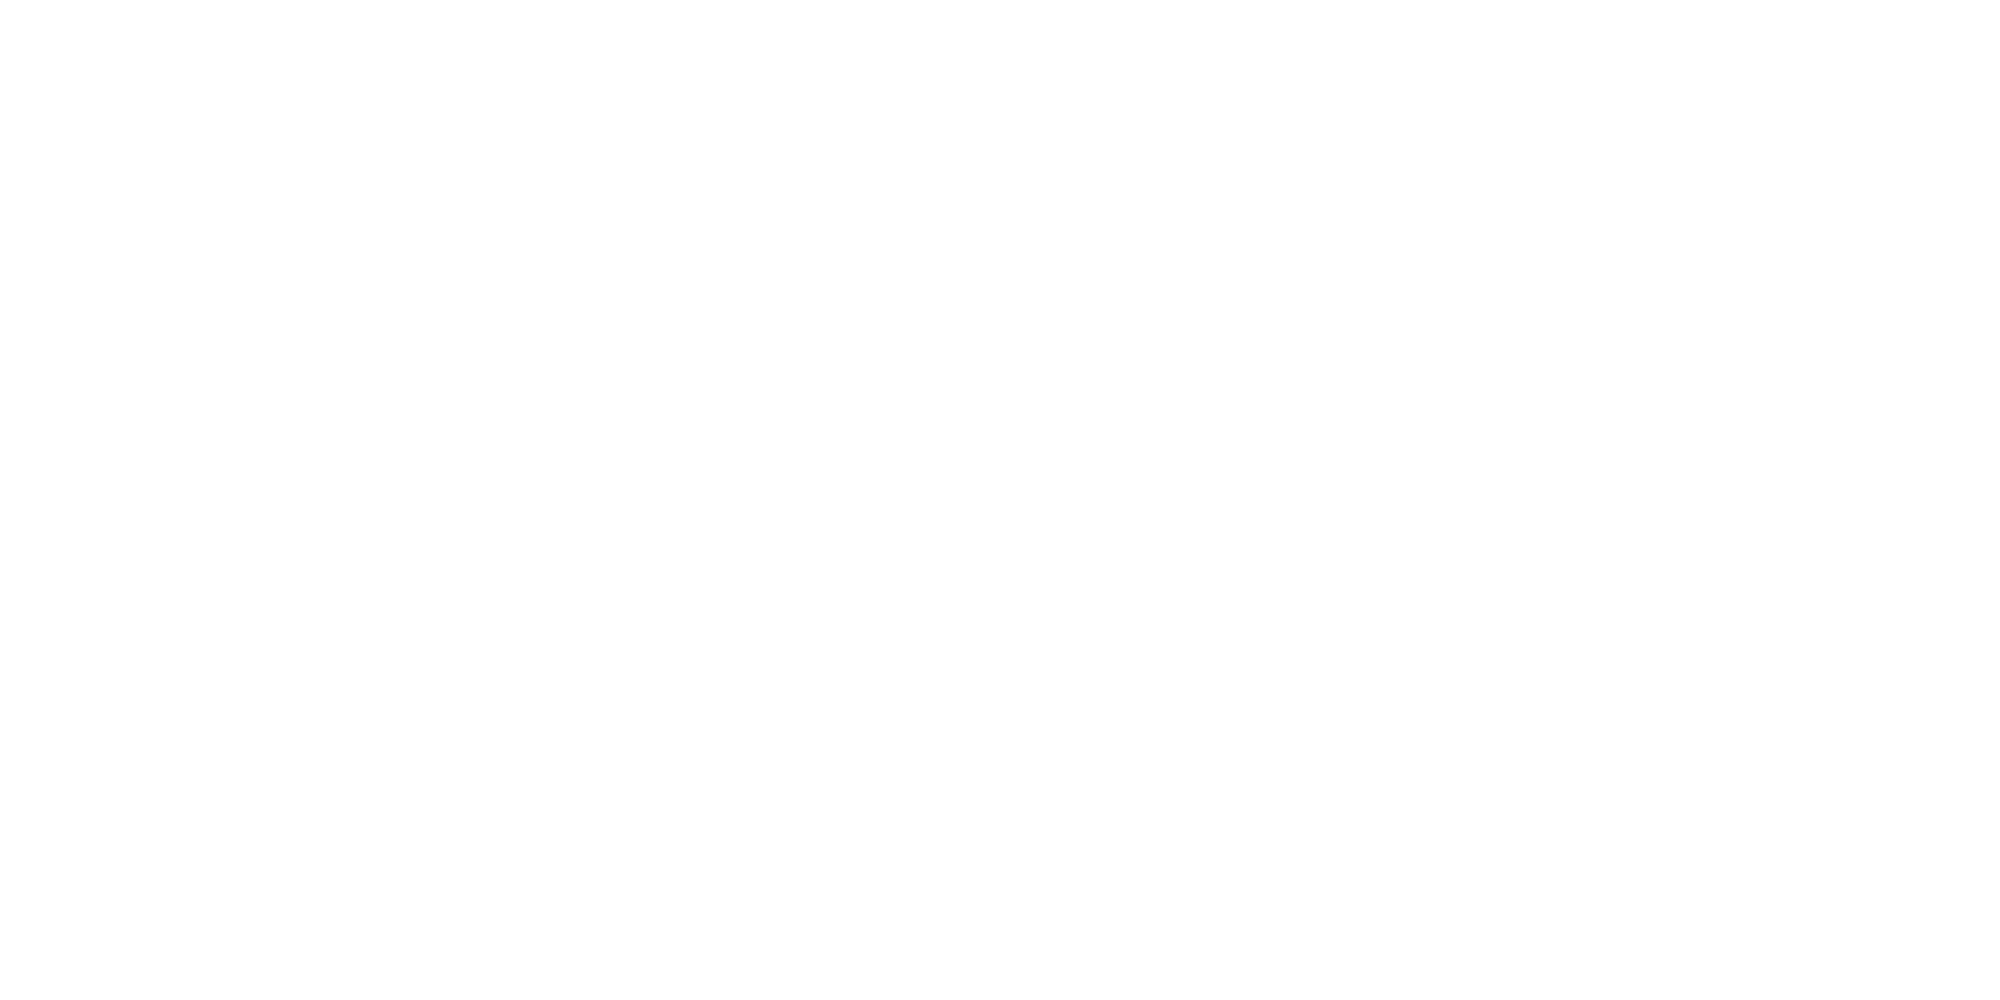 Green Things Garden, Gift & Maintenance Services